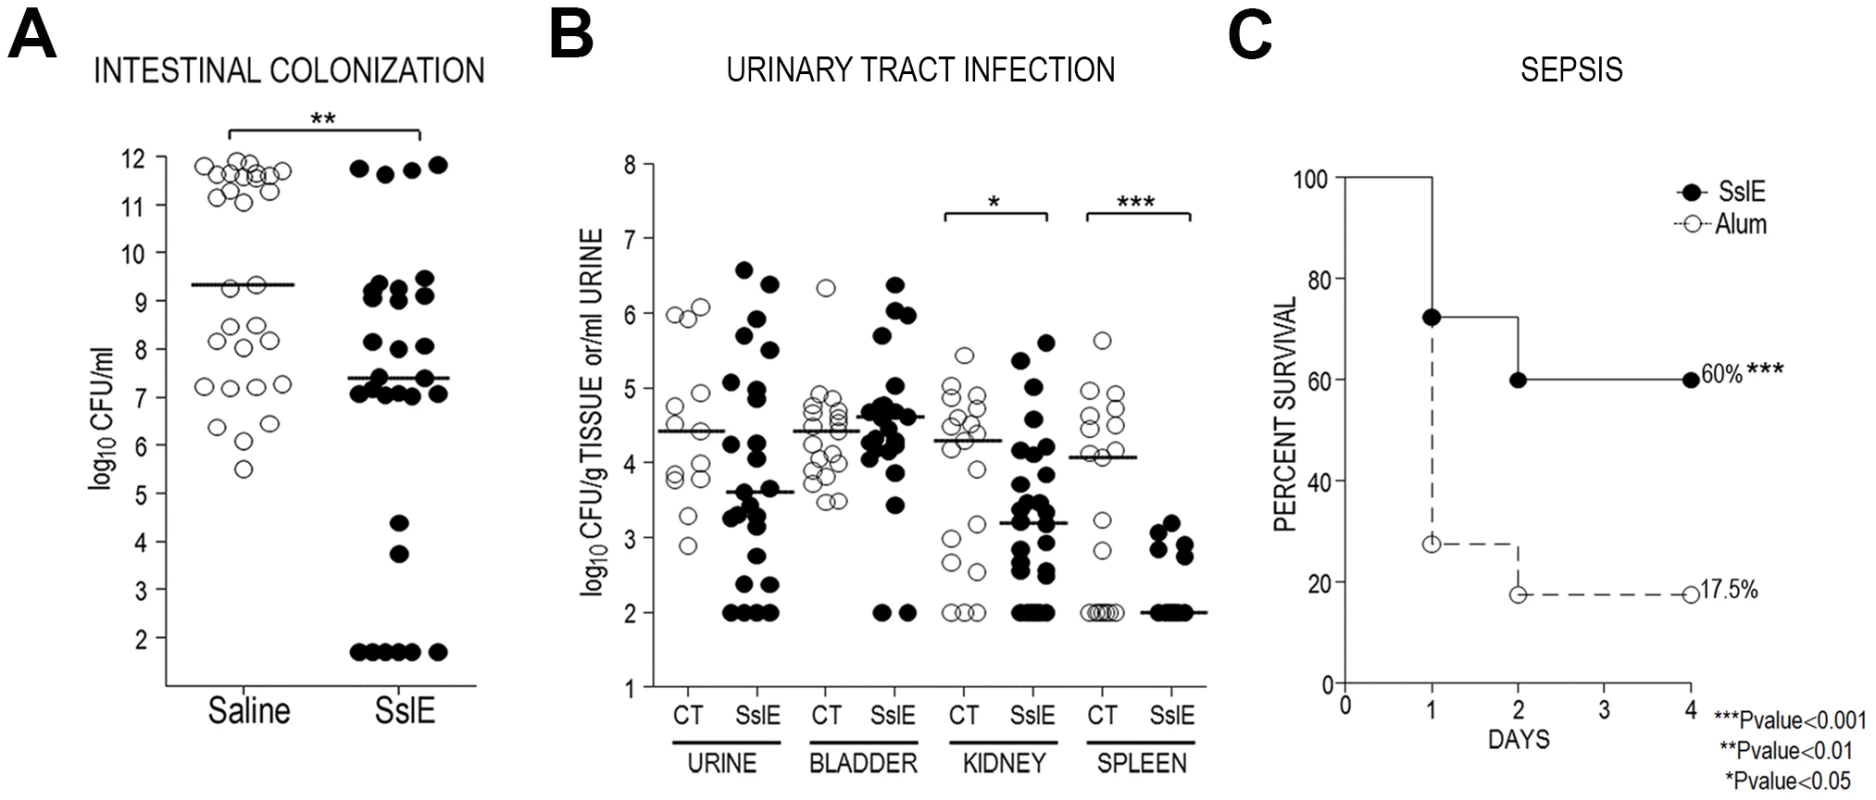 SslE<sub>IHE3034</sub> induces cross-protection in intestinal colonization, UTI and sepsis models.